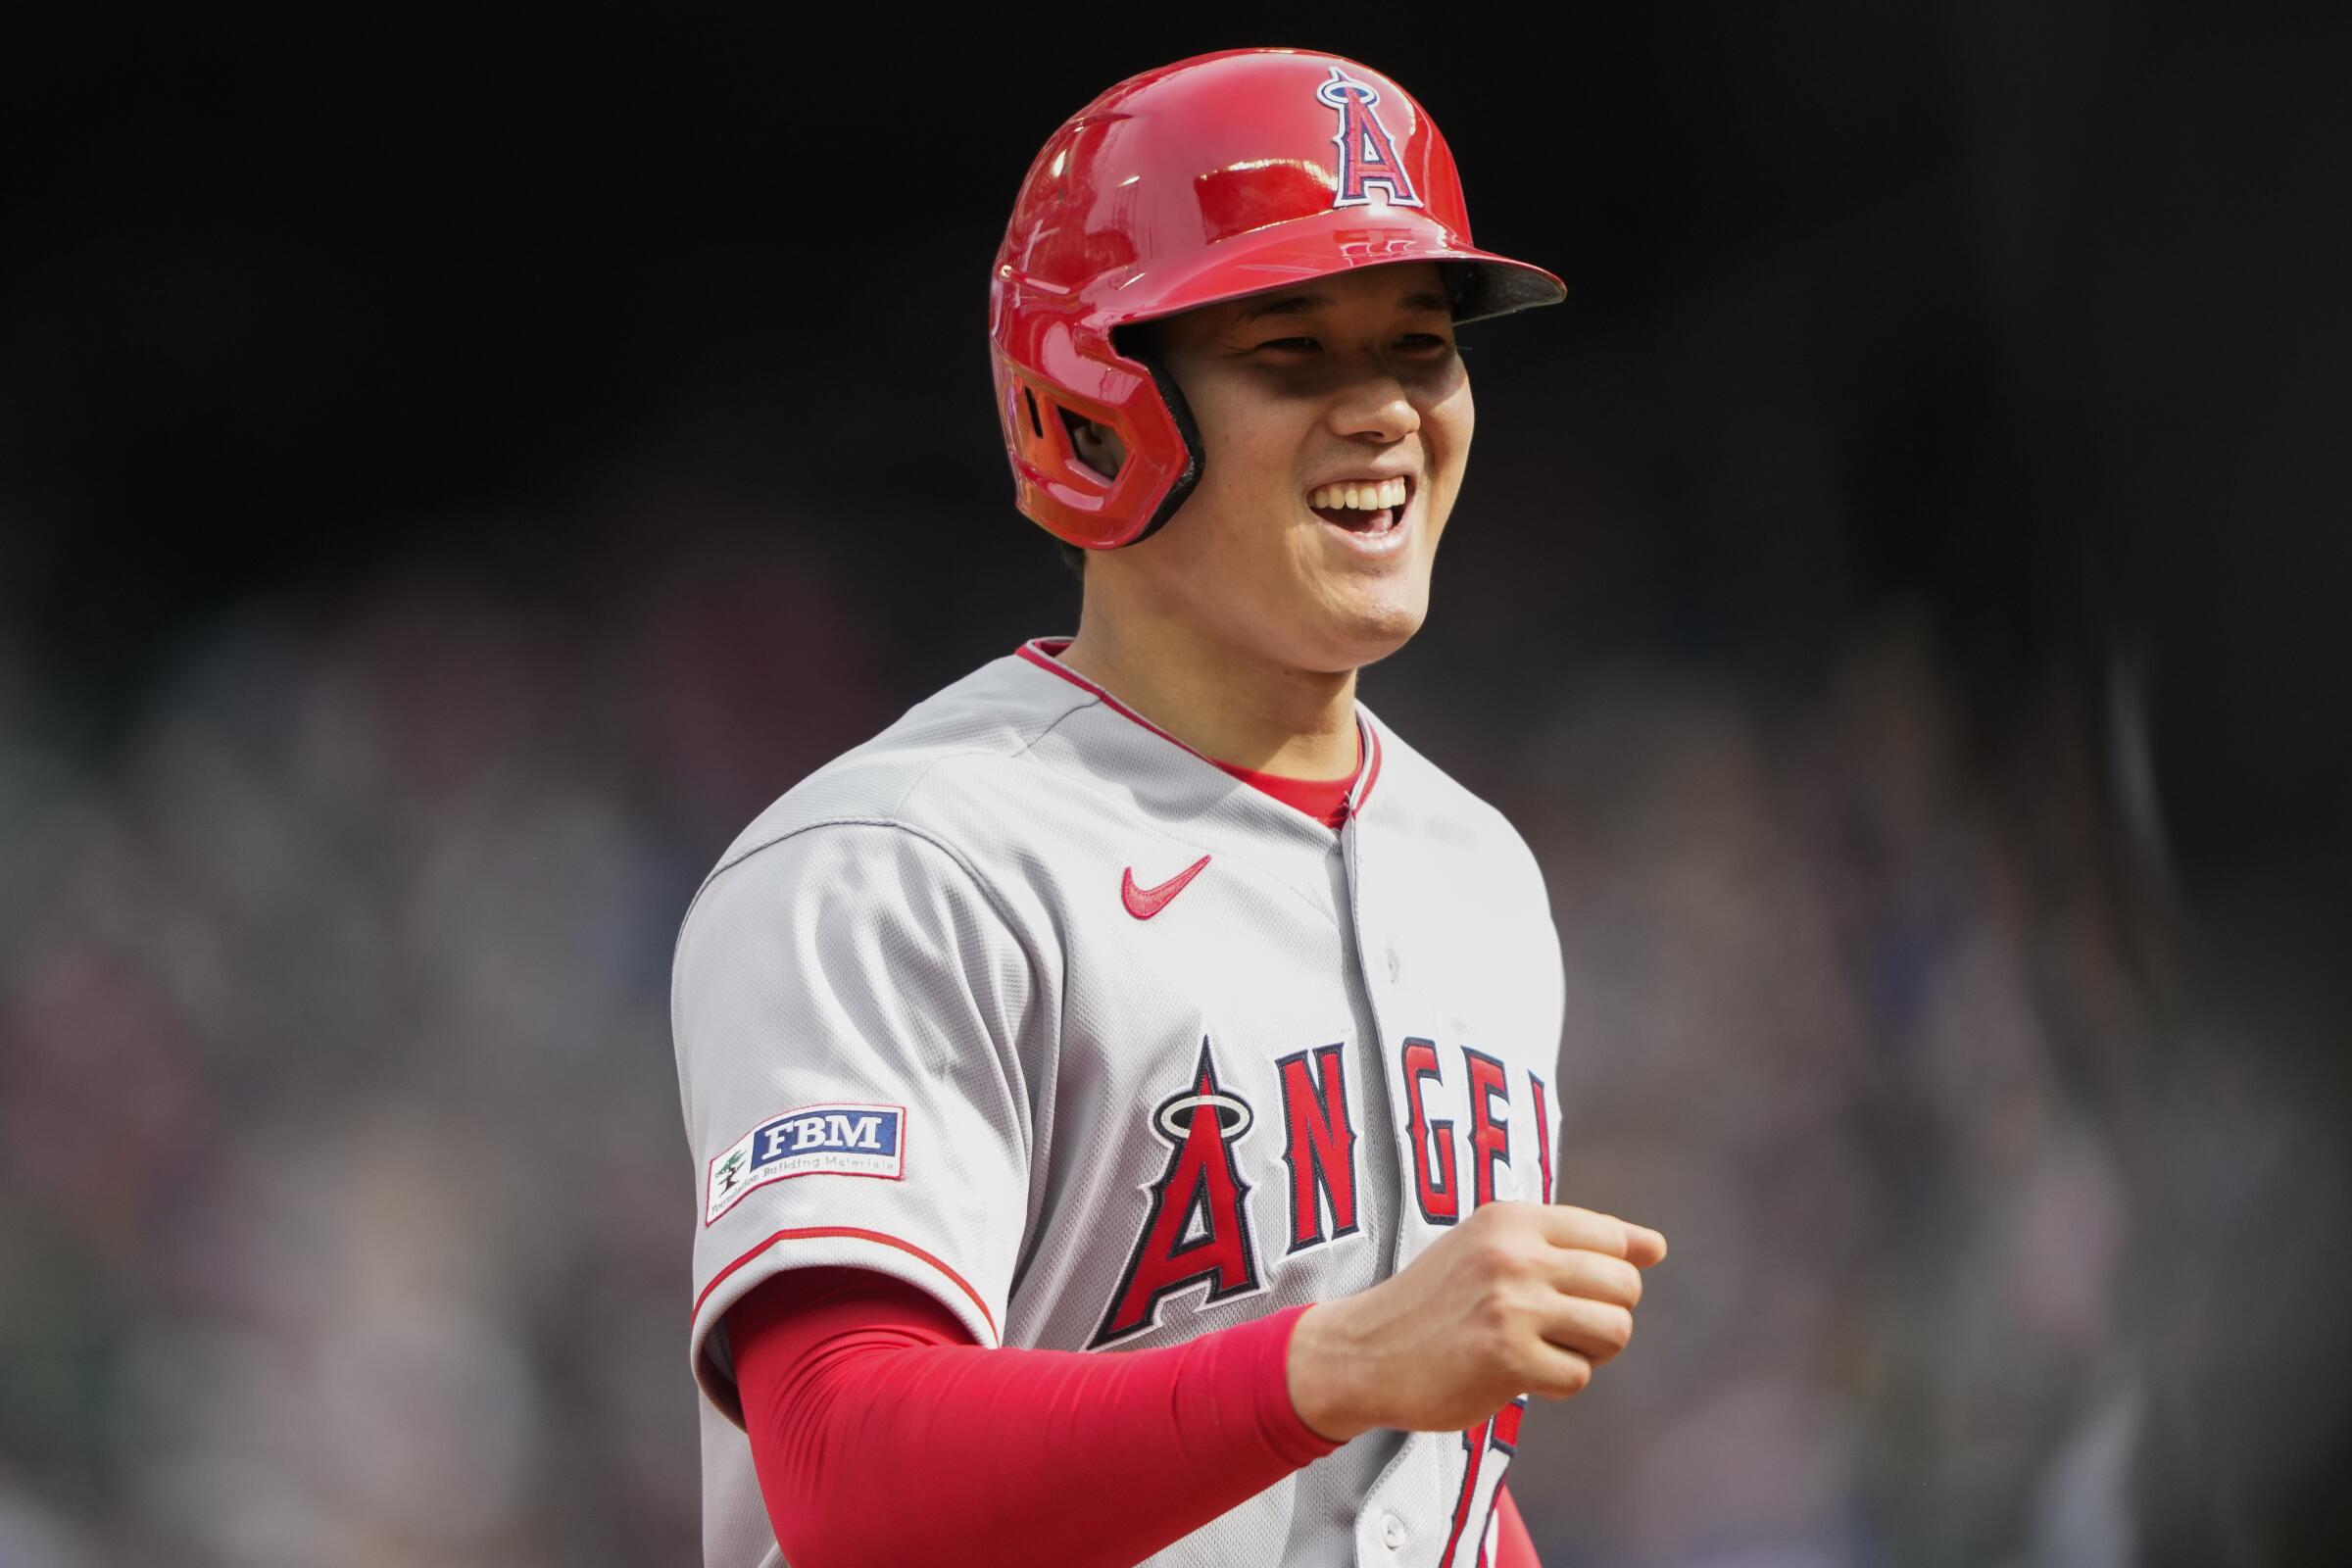 Angels' Shohei Ohtani smiles as he returns to the dugout after the seventh inning against the Seattle Mariners.